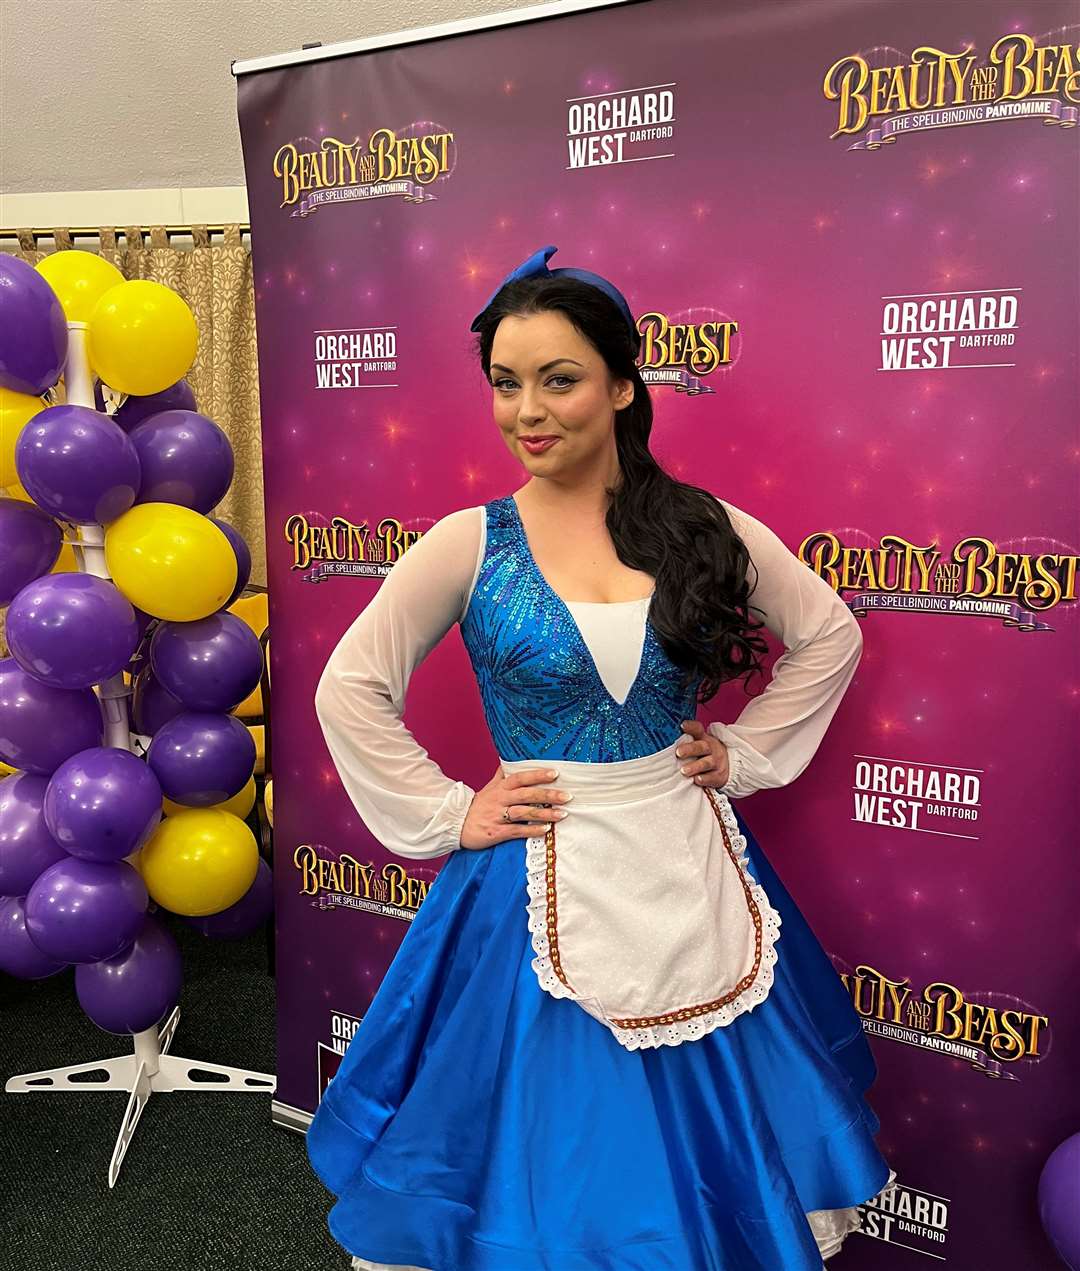 EastEnders Shona McGarty plays Belle in Beauty and the Beast